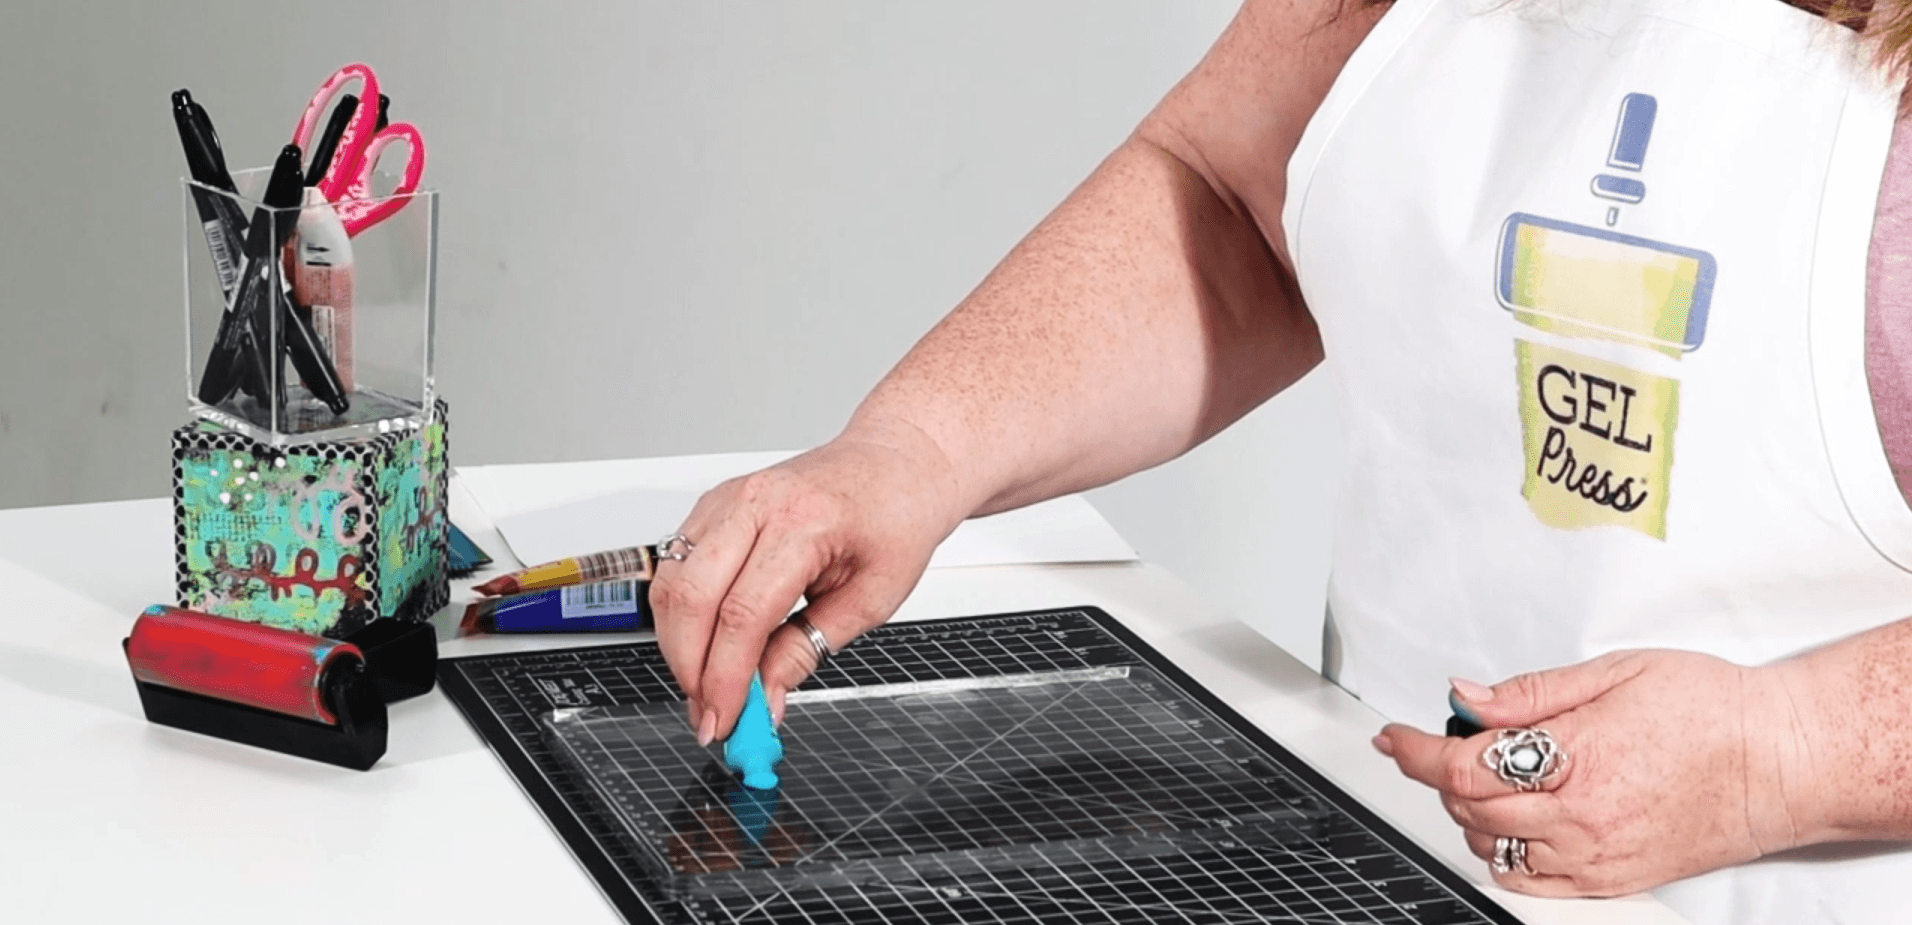 How to Clean Gel Plates: Step-by-Step Guide - Gel Press